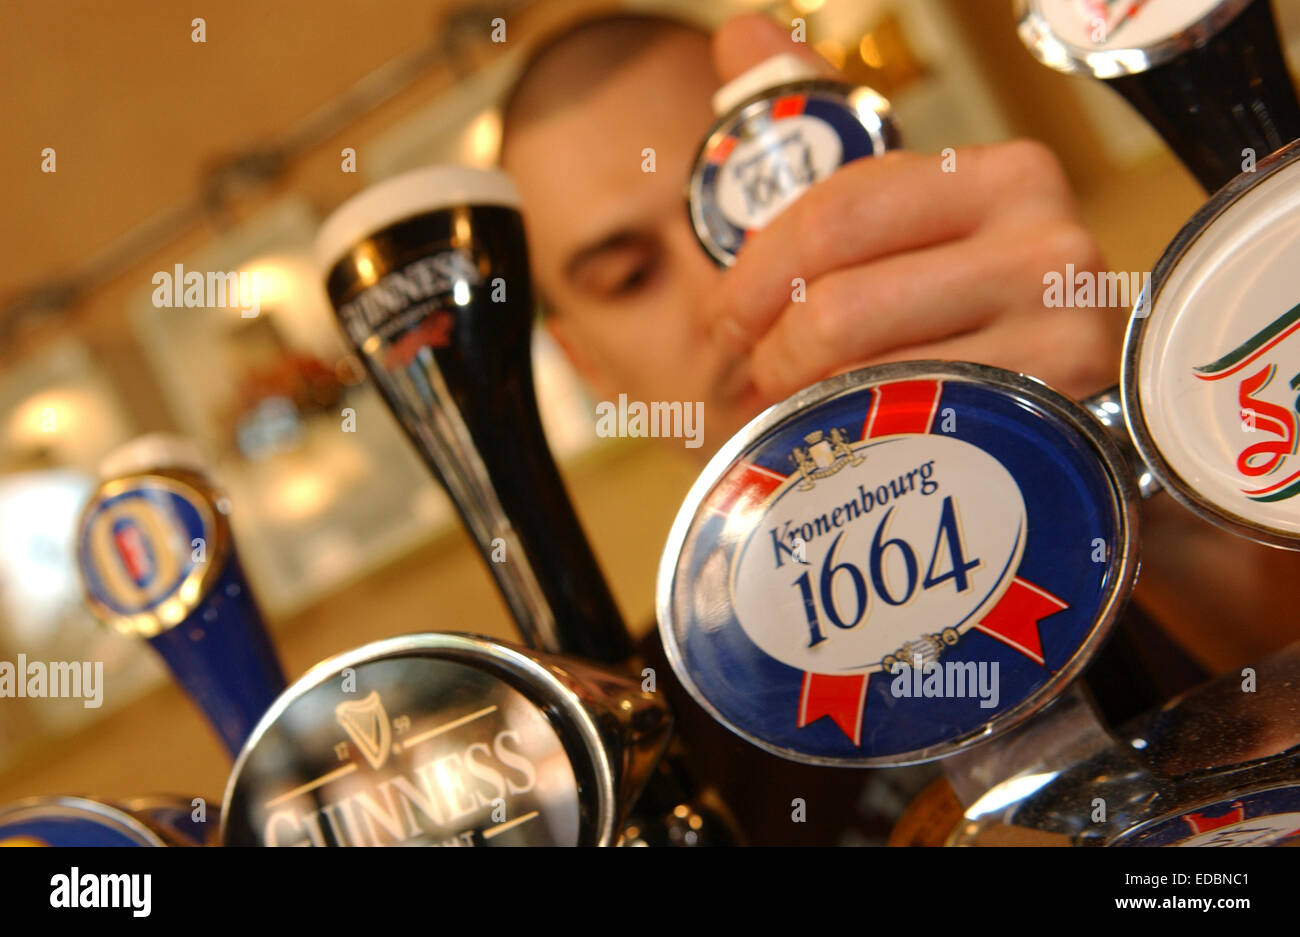 A Kronenbourg pump, a Scottish and Newcastle brand. Stock Photo